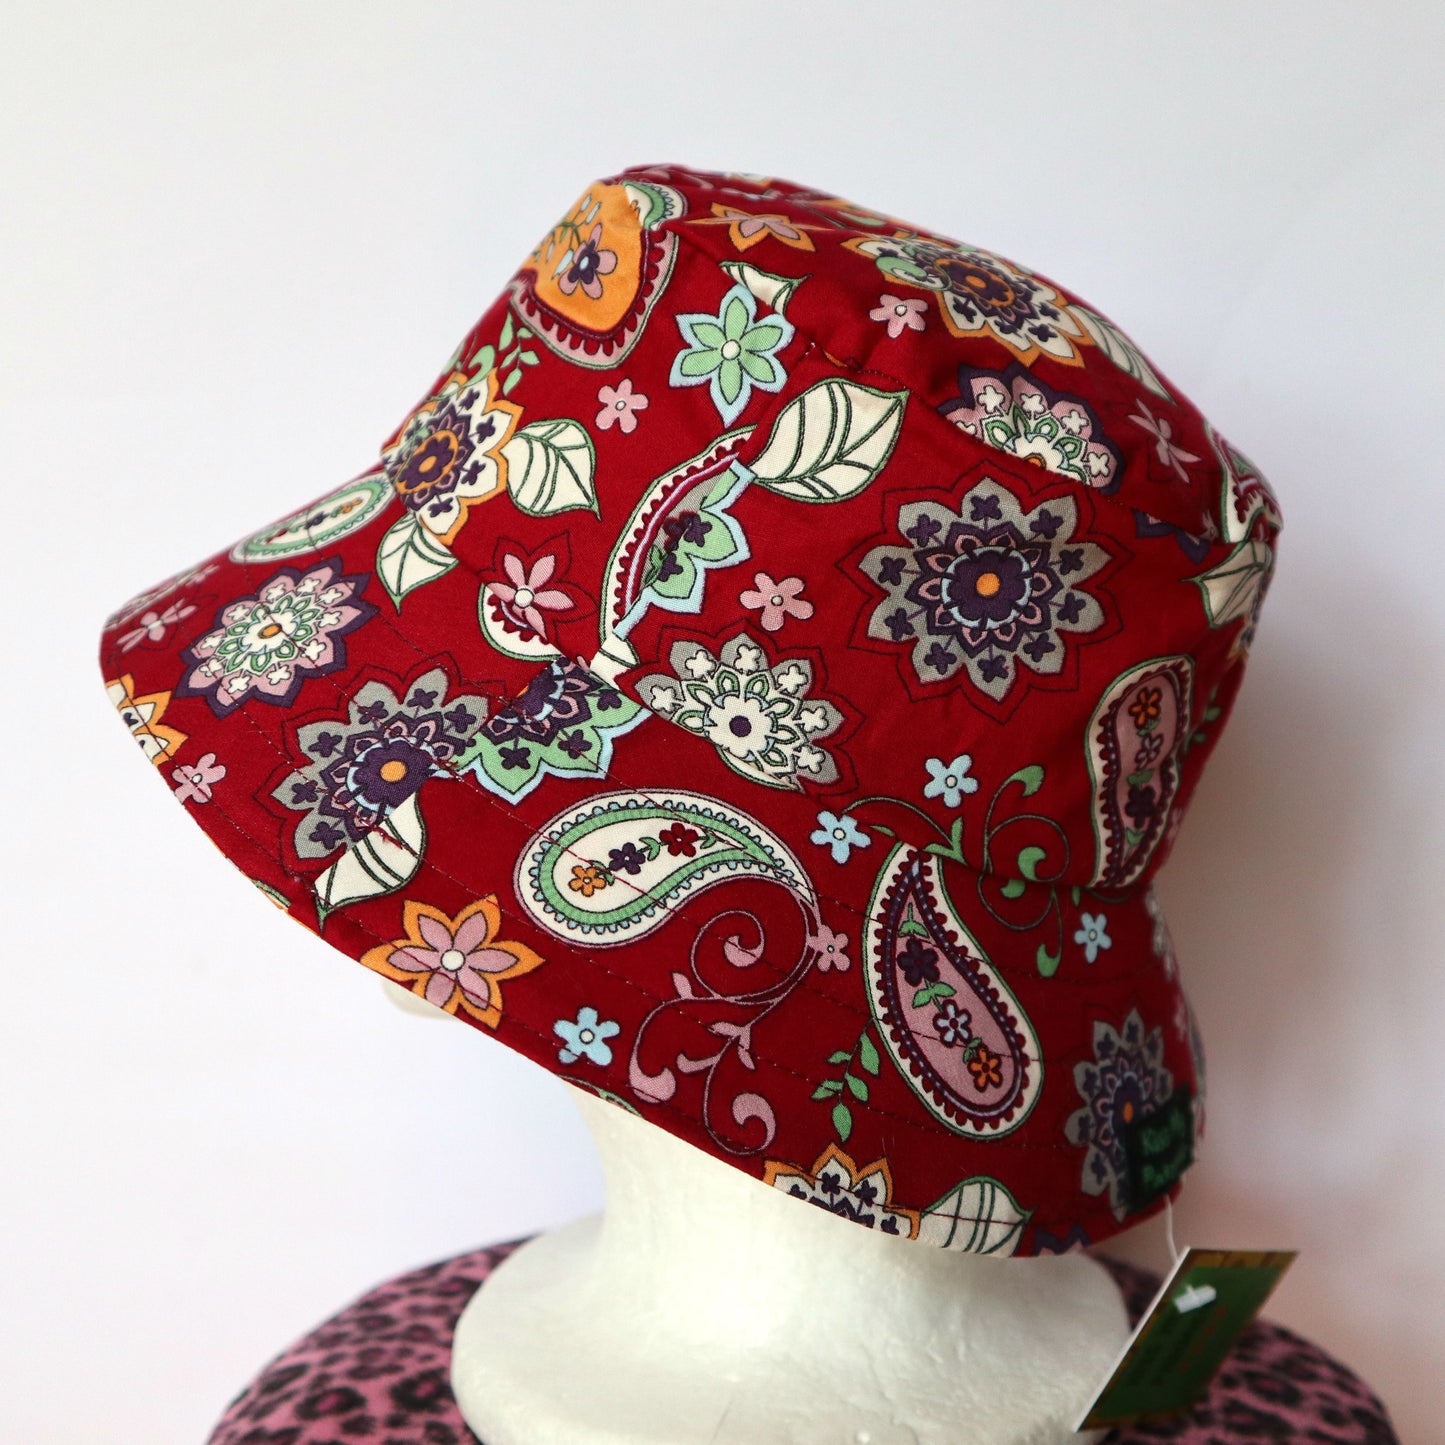 Reversible Bucket Hat - sizes 3 mths - 6 yrs - red paisley